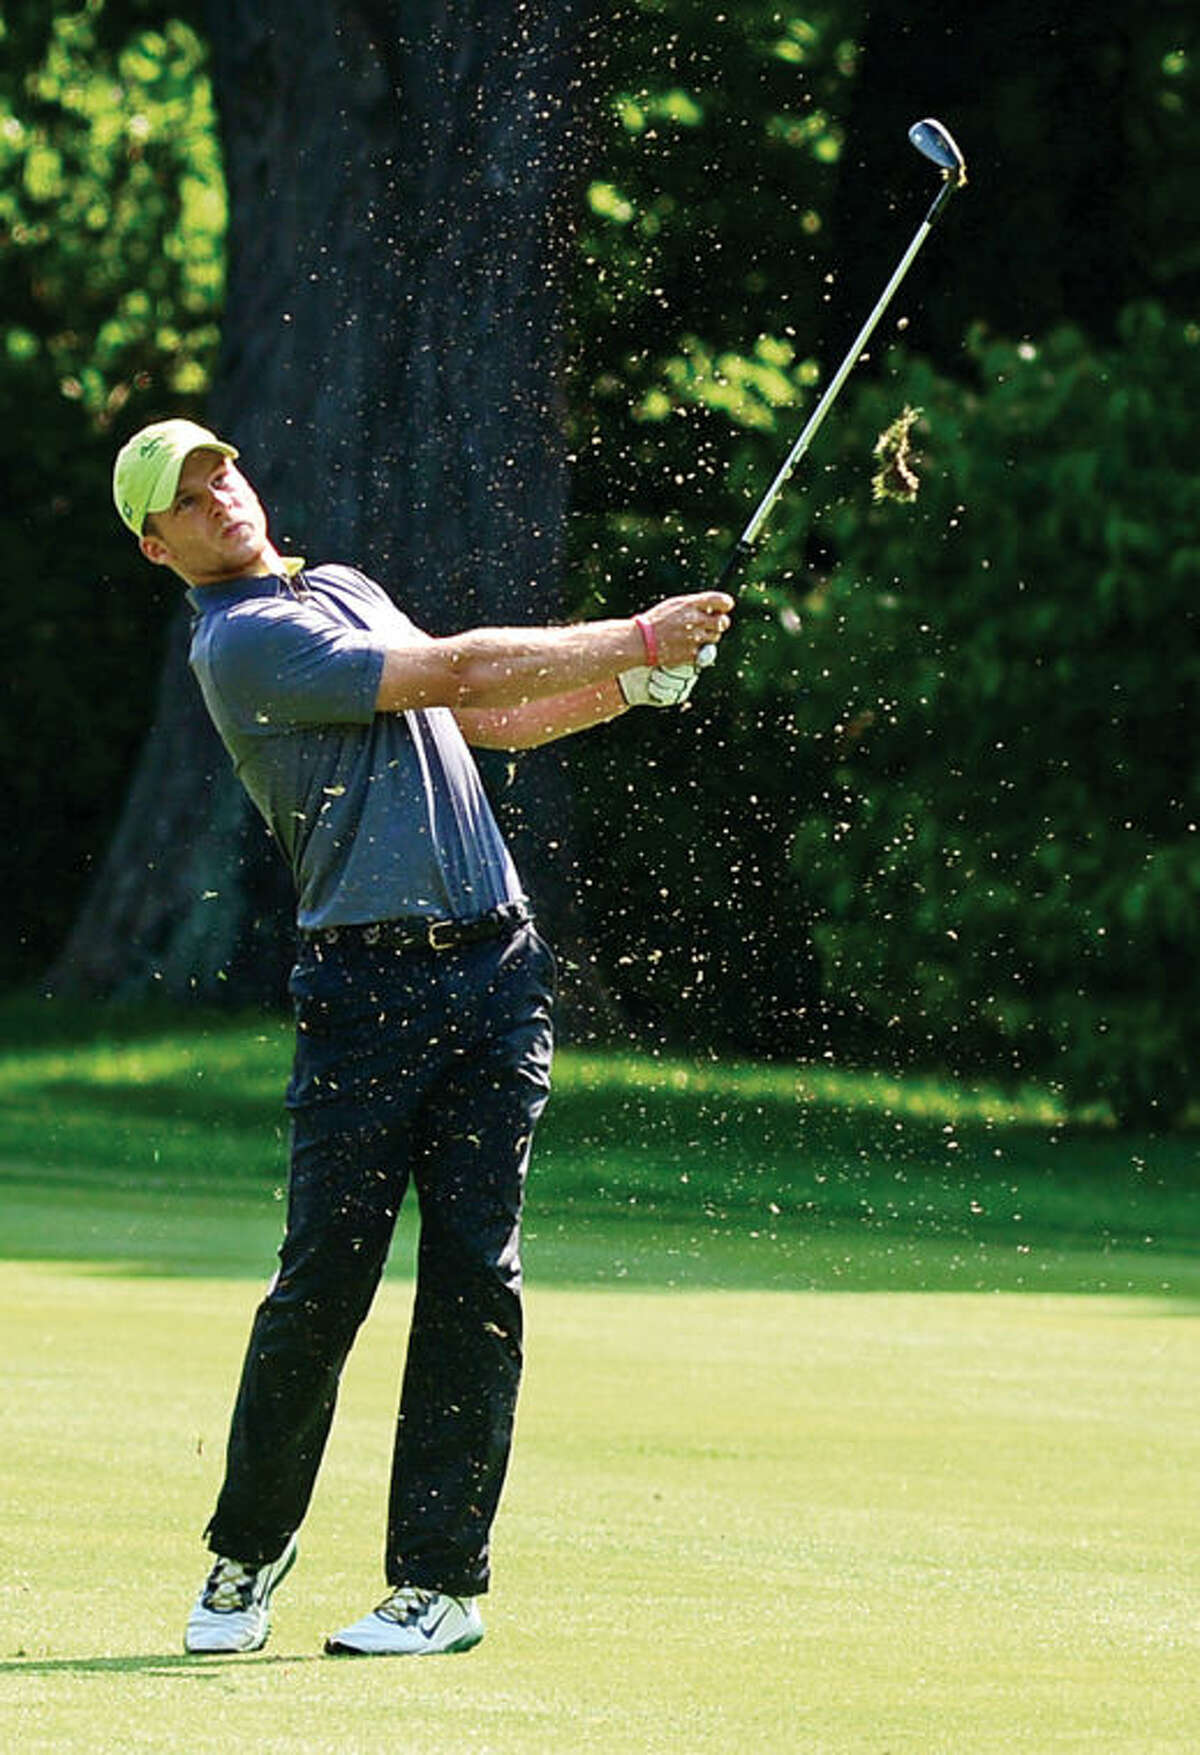 Hour photo / Erik Trautmann John Jackopsic of Gillette Ridge chips onto the first green during the final round of The Connecticut Open Golf championships at Rolling Hills Country Club Wednesday in Wilton.